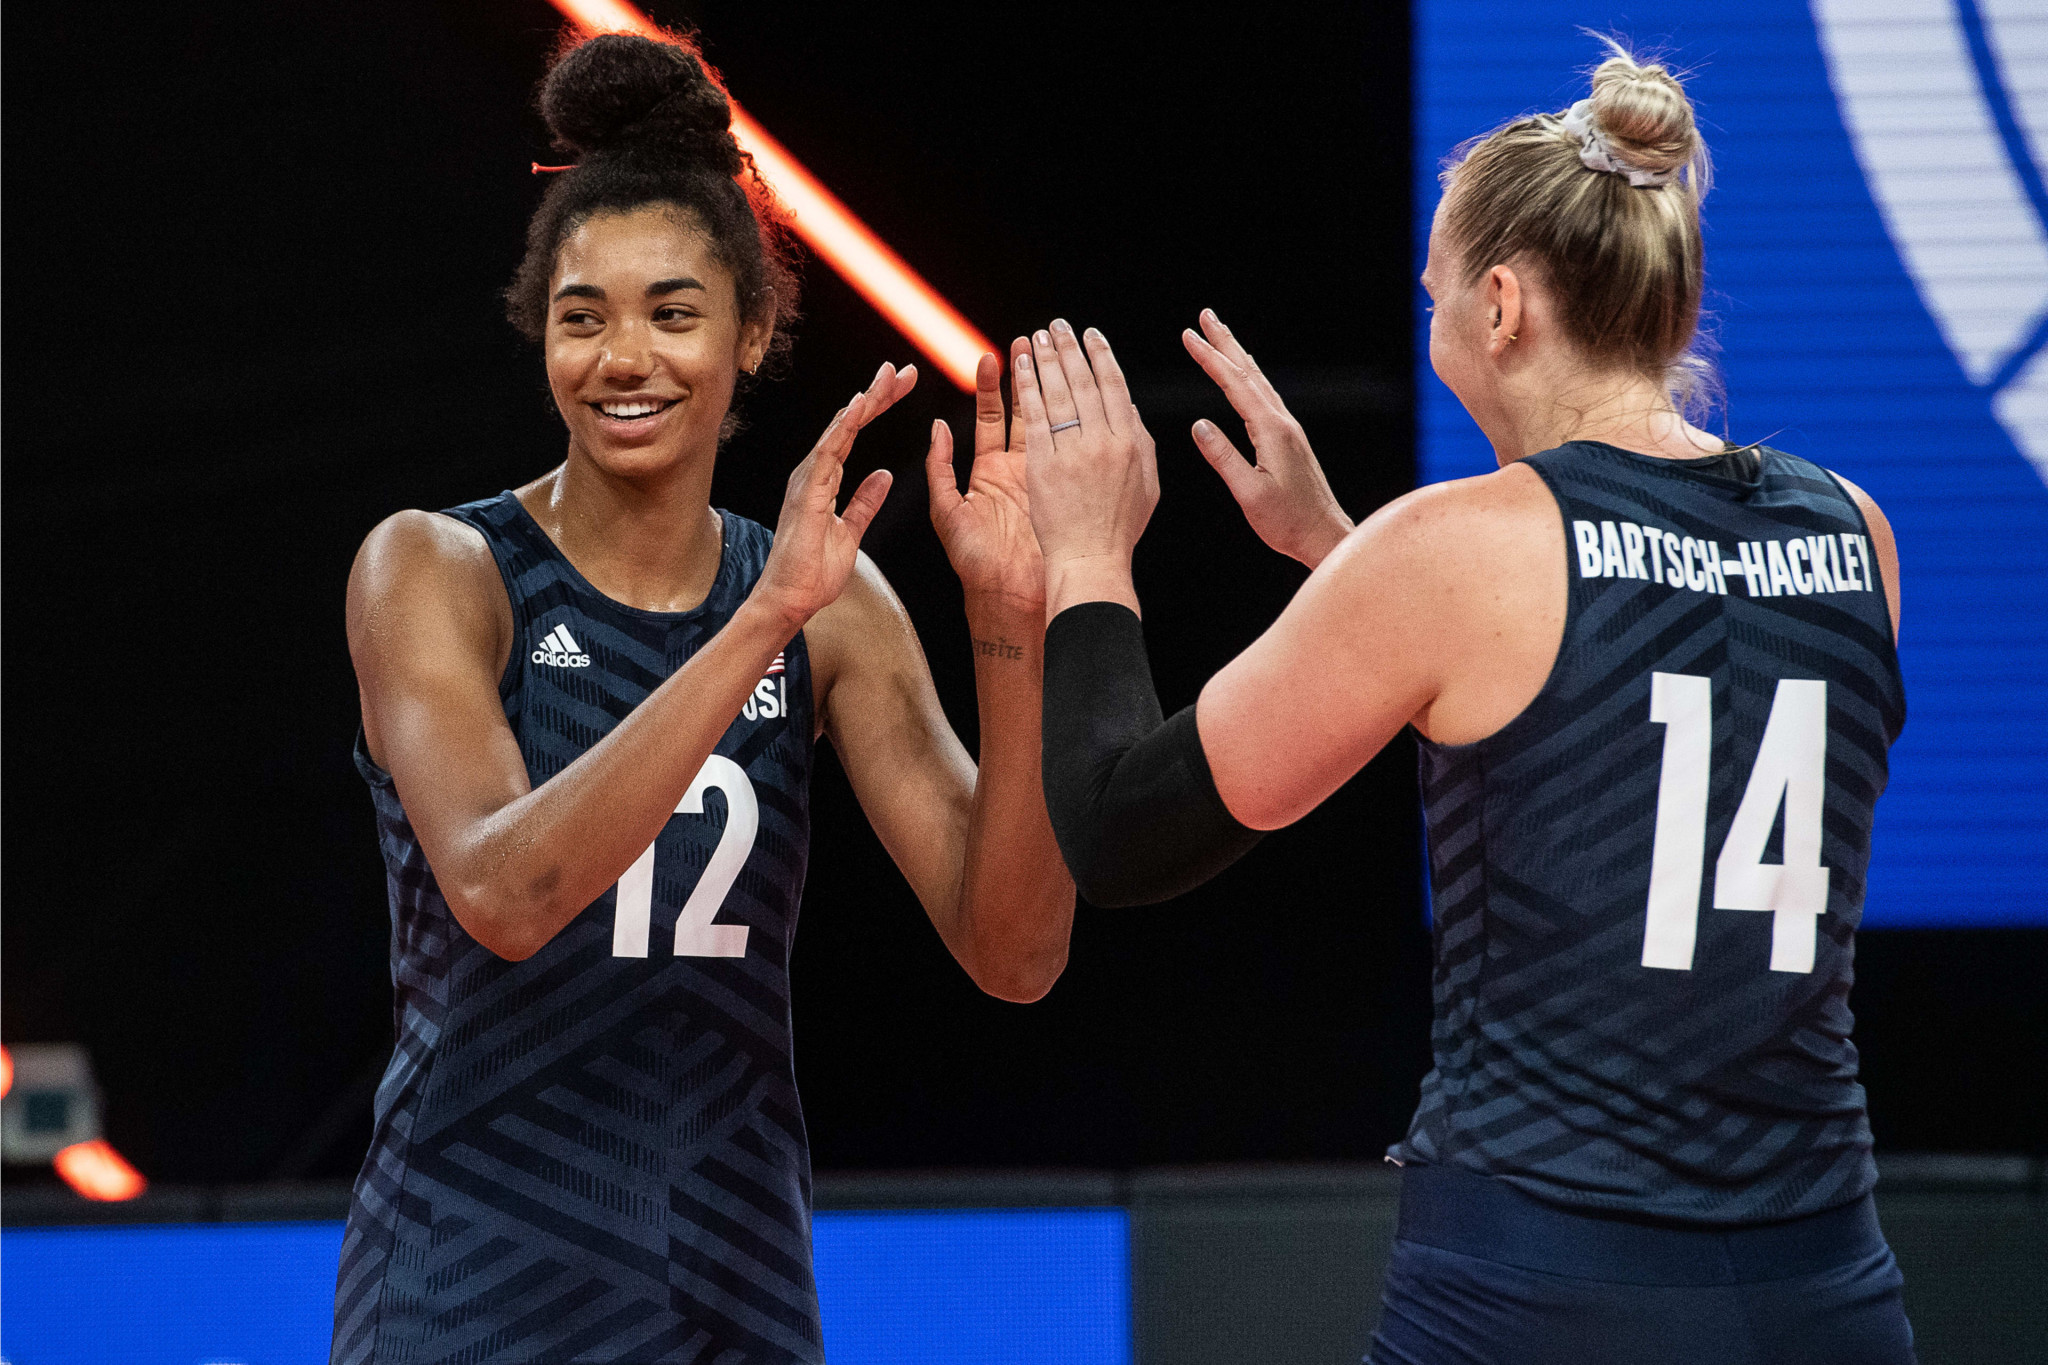 The United States are unbeaten after three weeks of the women's Volleyball Nations League thanks to a four set win over hosts Italy today ©Getty Images